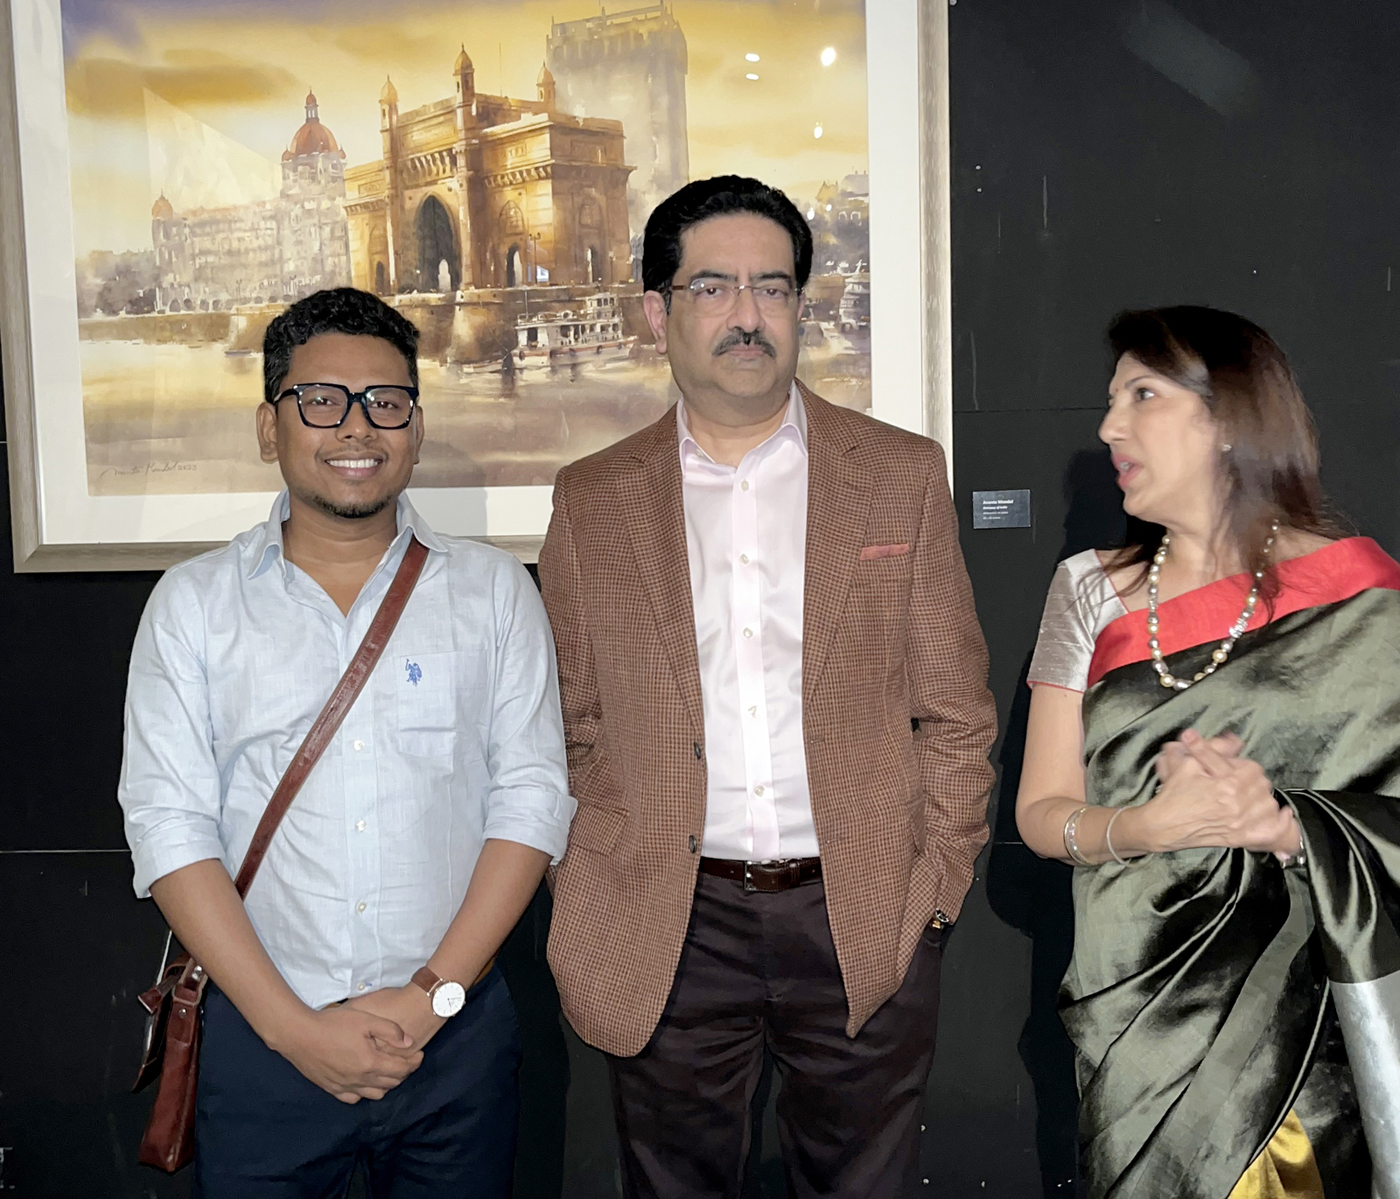 Ananta Mandal with Mr. Kumar Mangalam Birla and Dr. Tarana Khubchandani at opening day of “The Art of India” Mumbai, this epic exhibition where my artwork exhibiting along with 100 Indian masters!! At the Art of India powered by Ashar Group Experience the magic of art at the Snowball Studios, Worli, Mumbai from 19th to 25th March 2023.